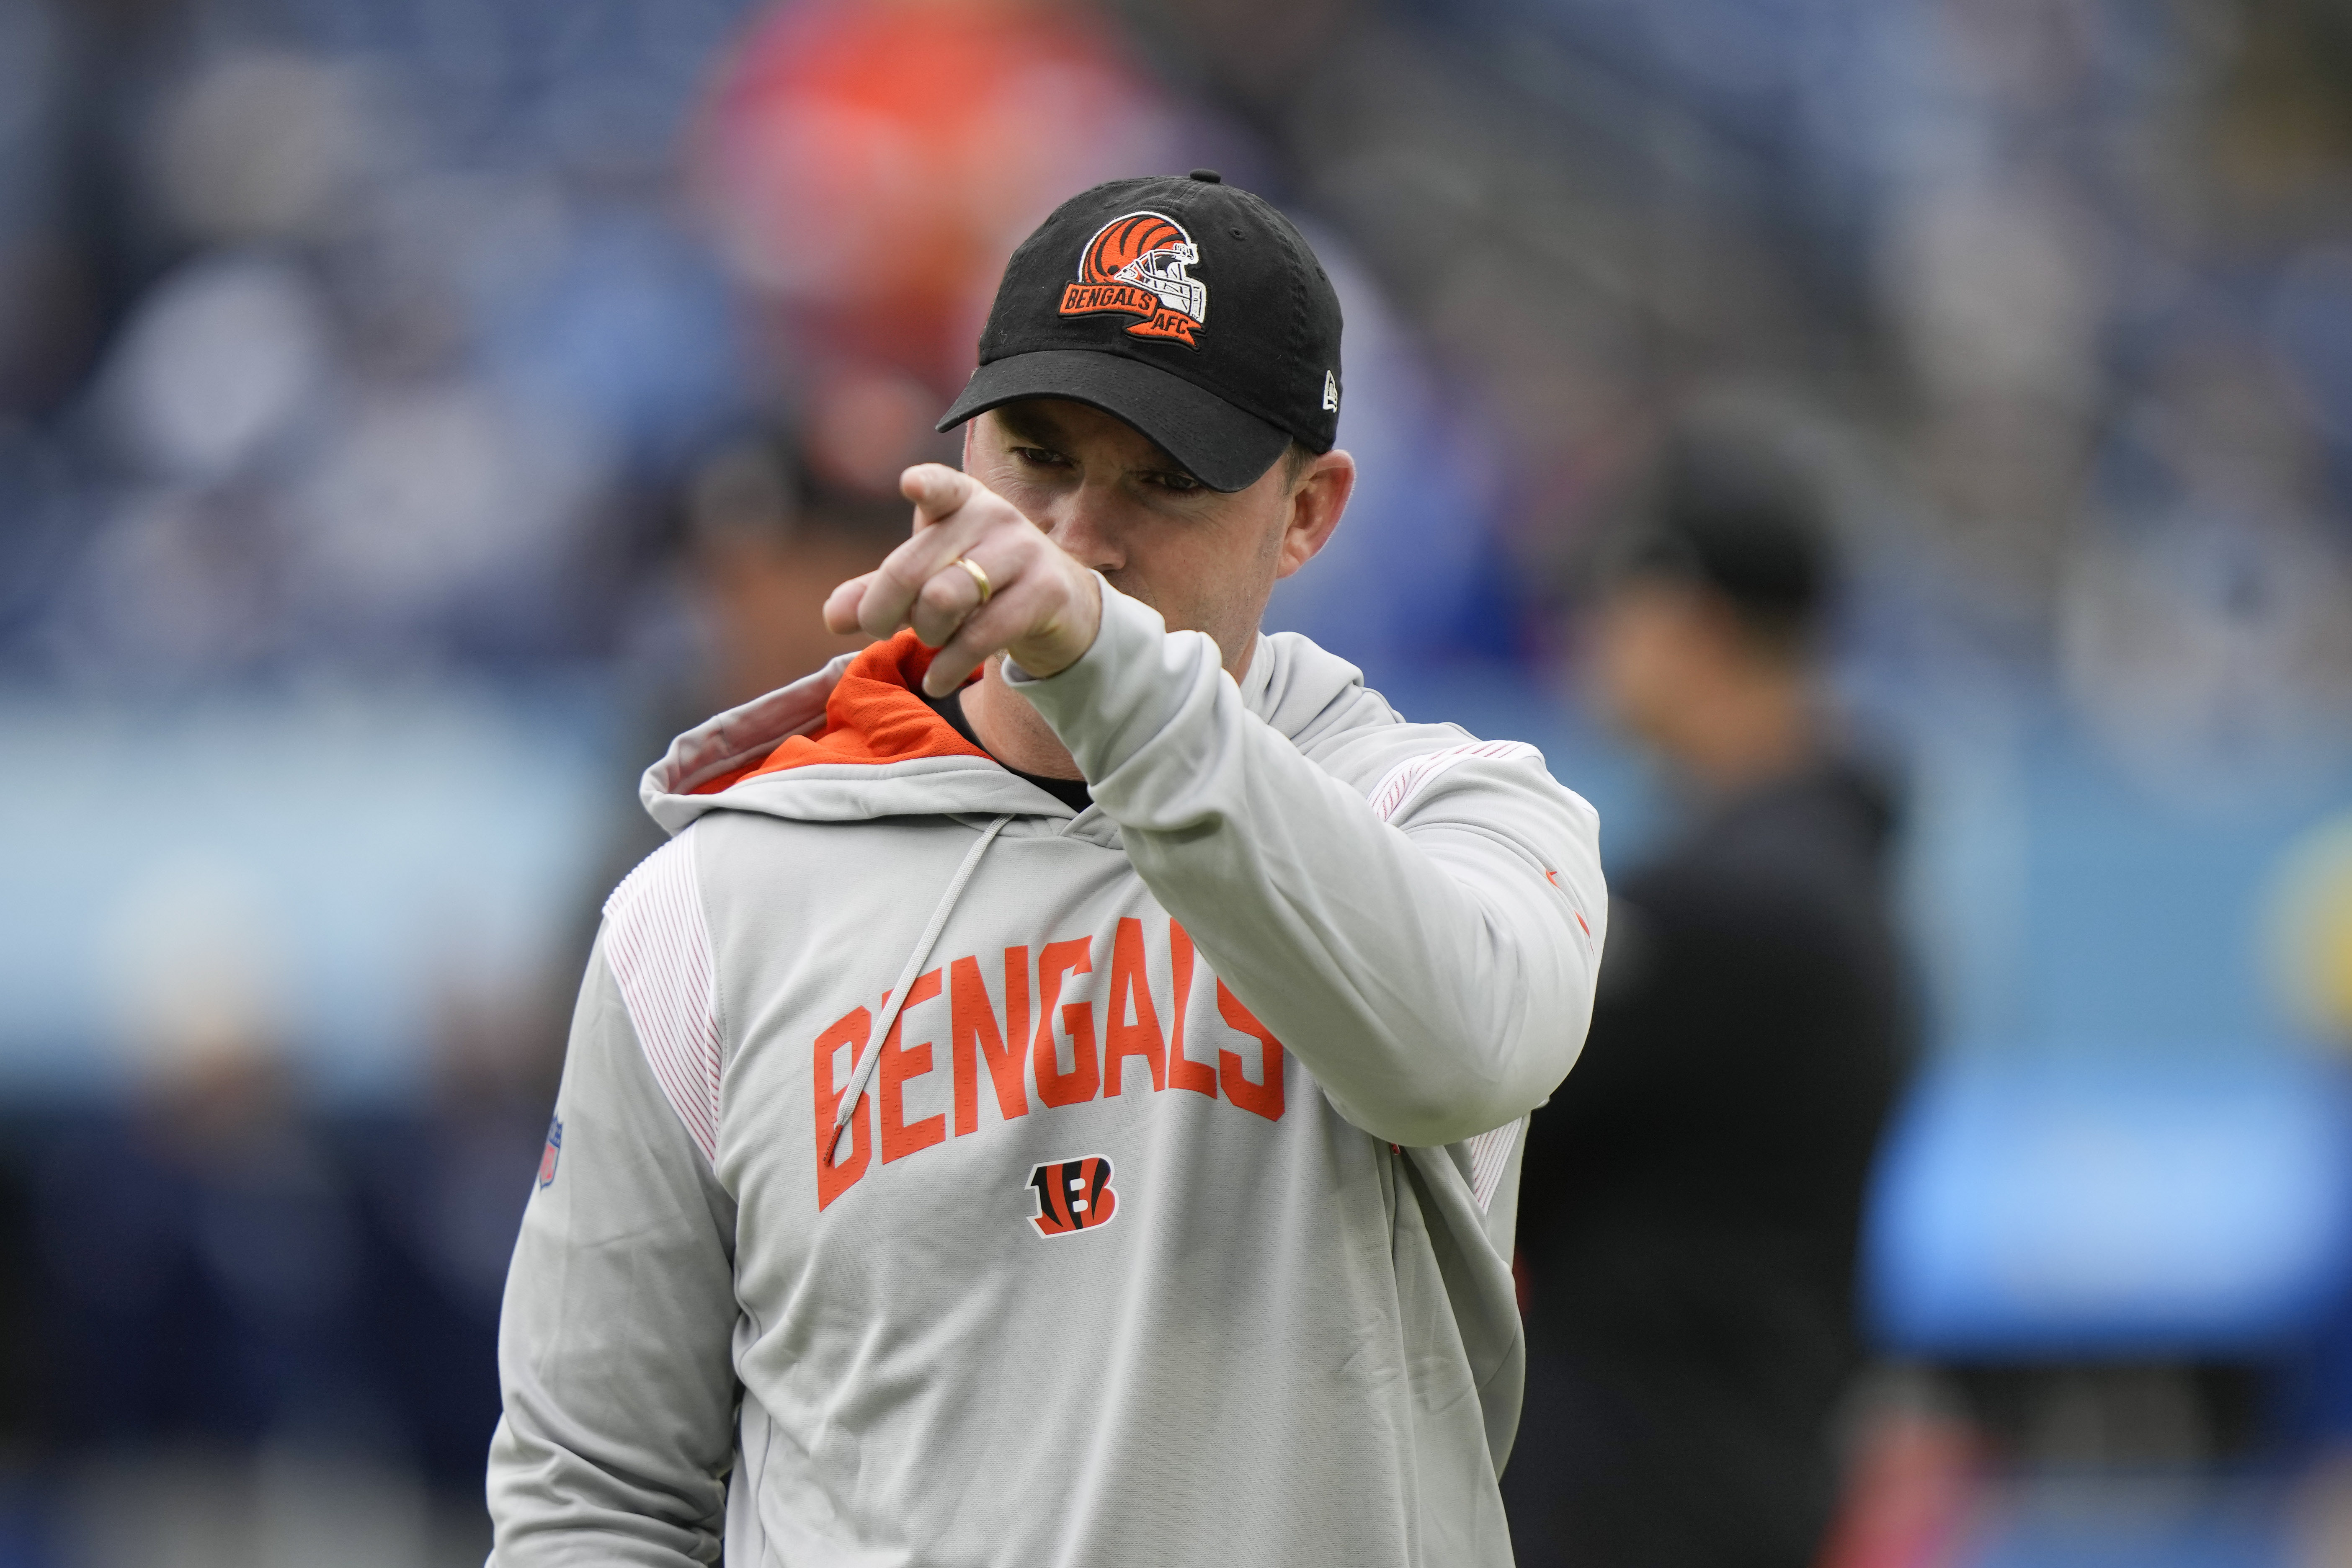 Bengals head coach Zac Taylor: 'They'll have to carry me out of here in a  casket' 